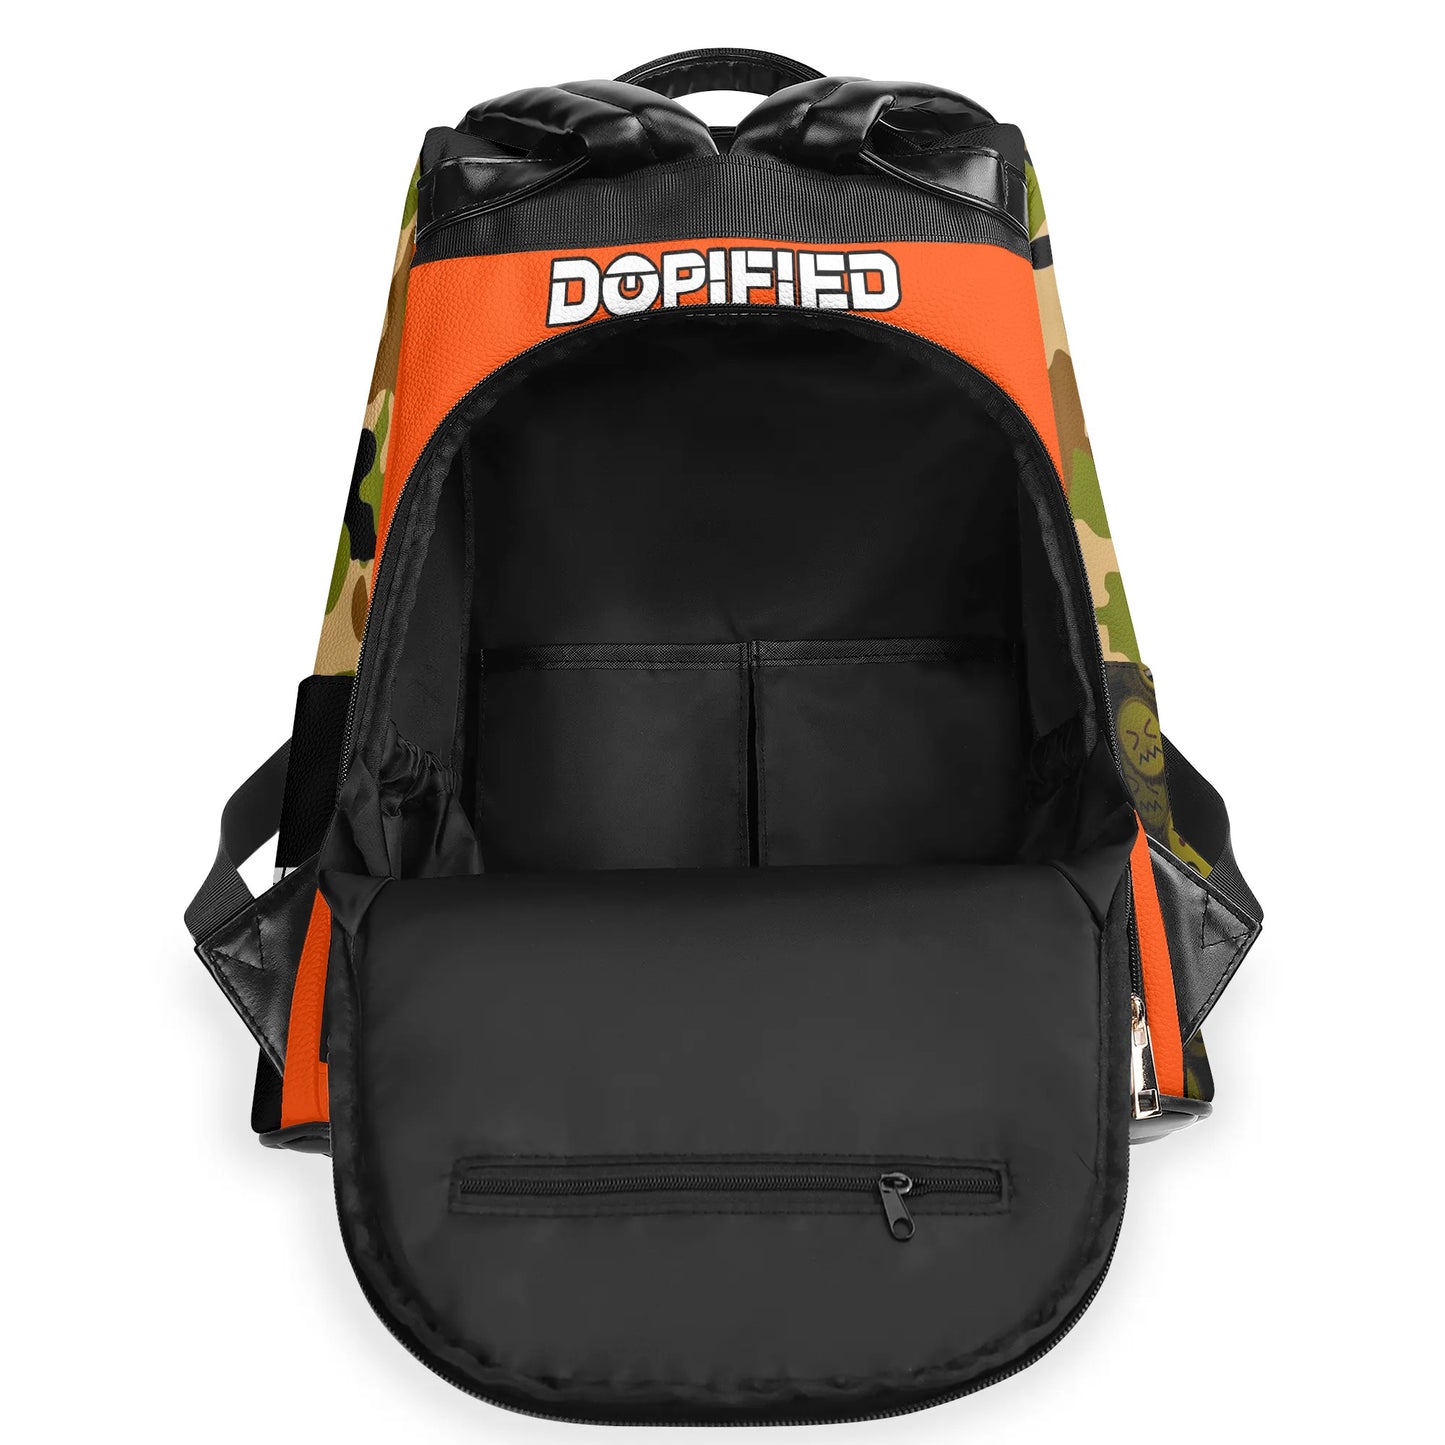 DOPiFiED New Travel PU Daypack Anti-theft Backpack